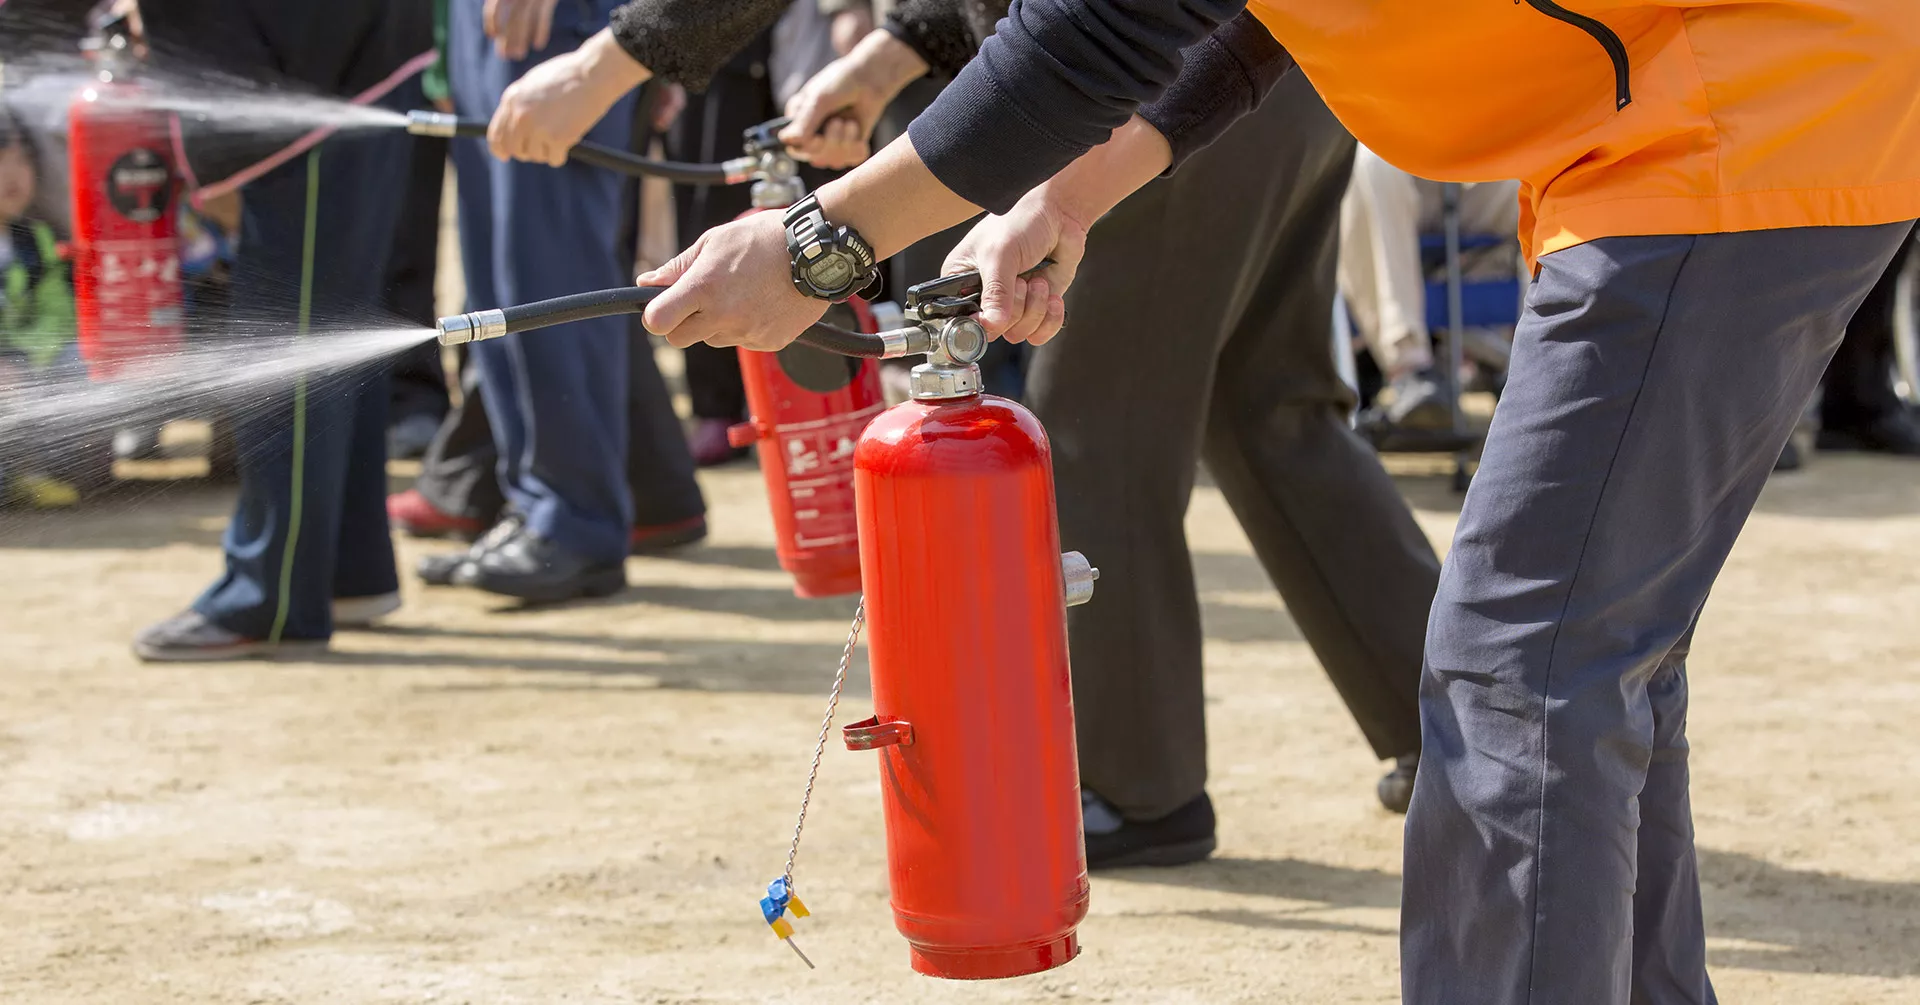 How to Conduct Fire Safety Training for Employees: 5 Steps